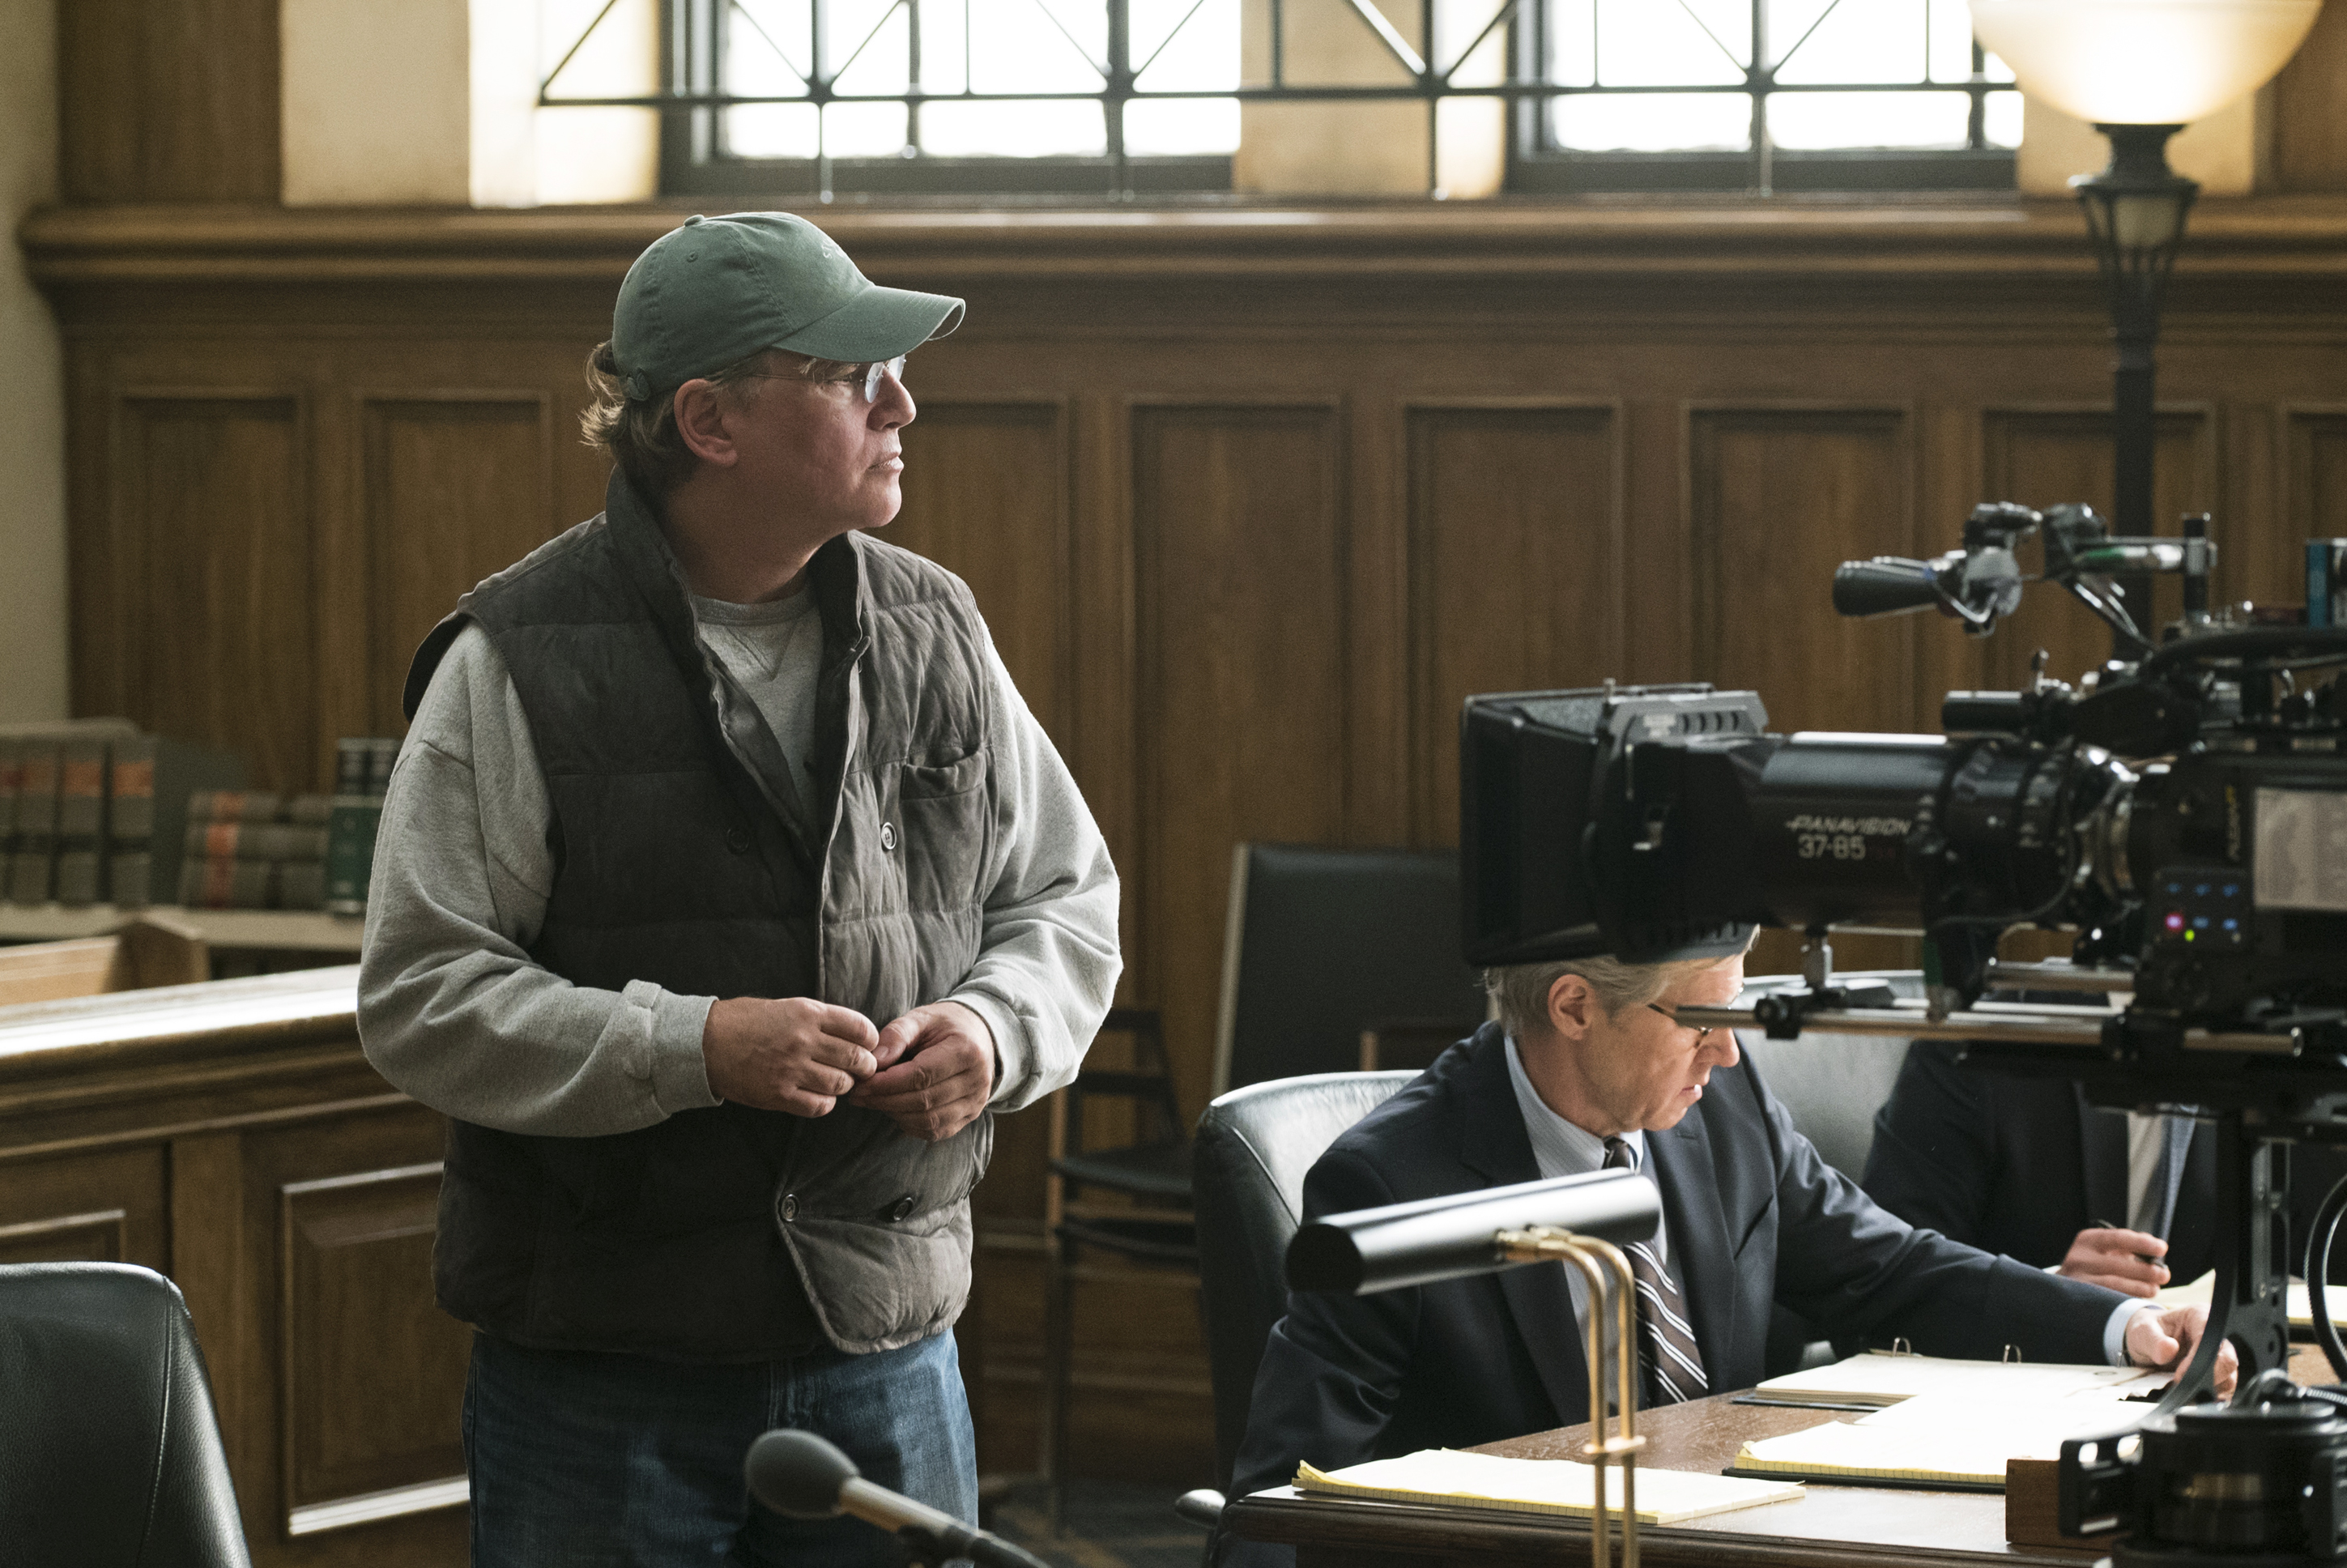 Behind the scenes with Director Aaron Sorkin on the set of MOLLY'S GAME